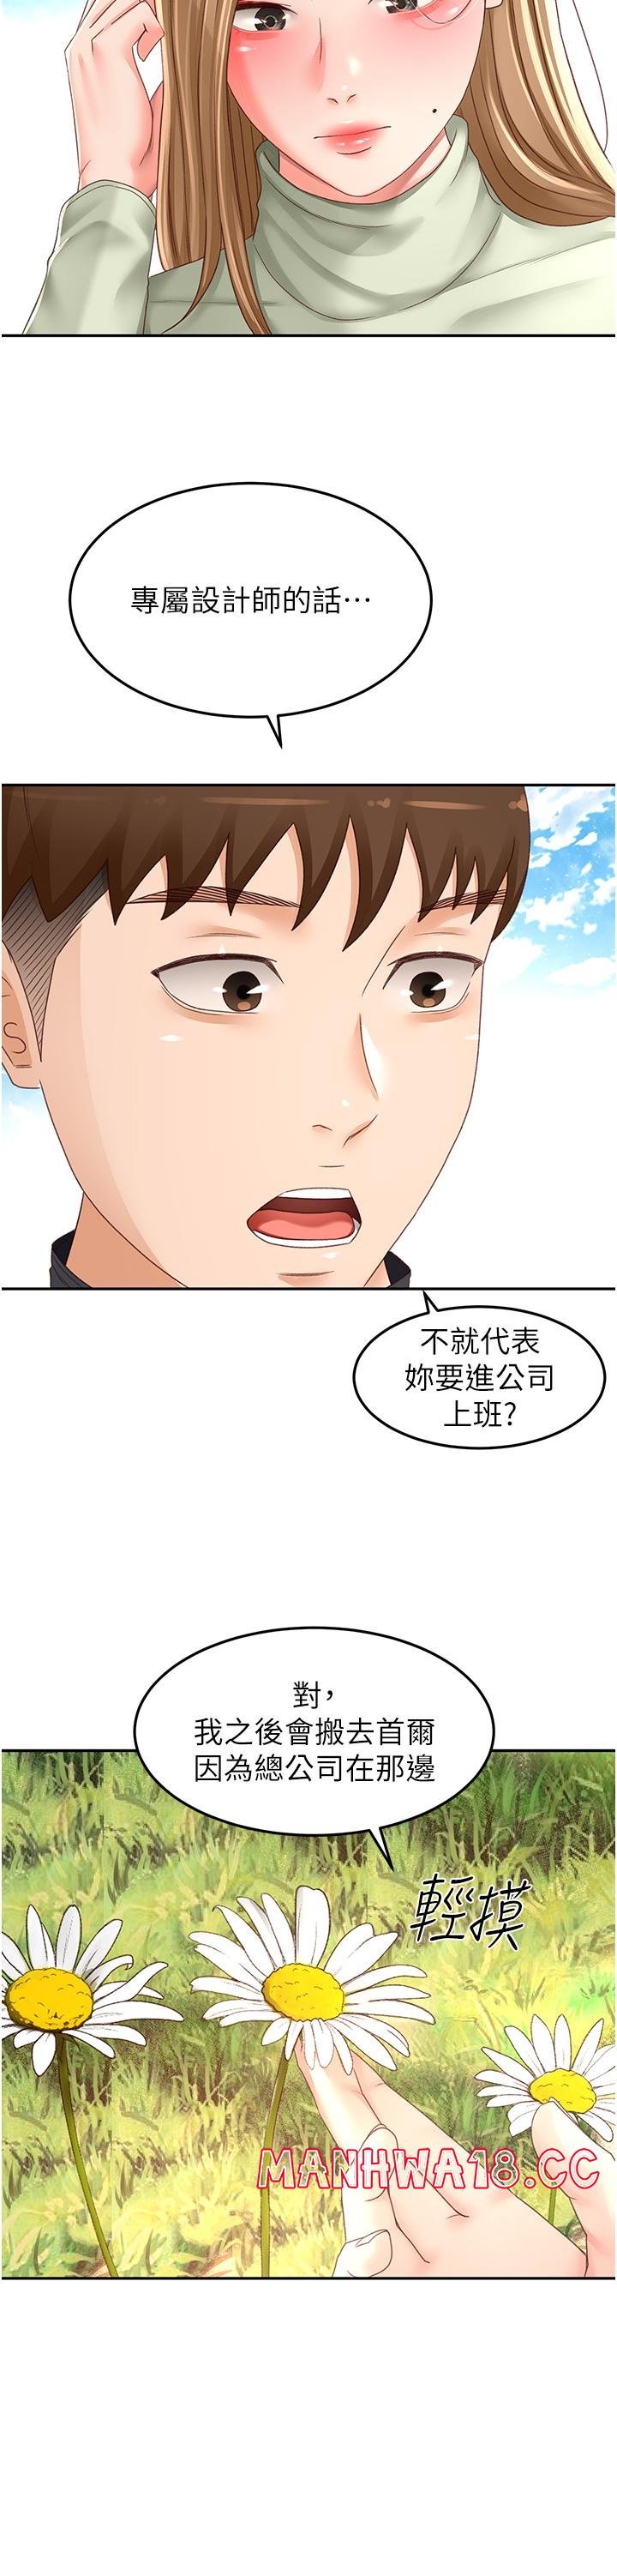 the-little-master-raw-chap-83-3